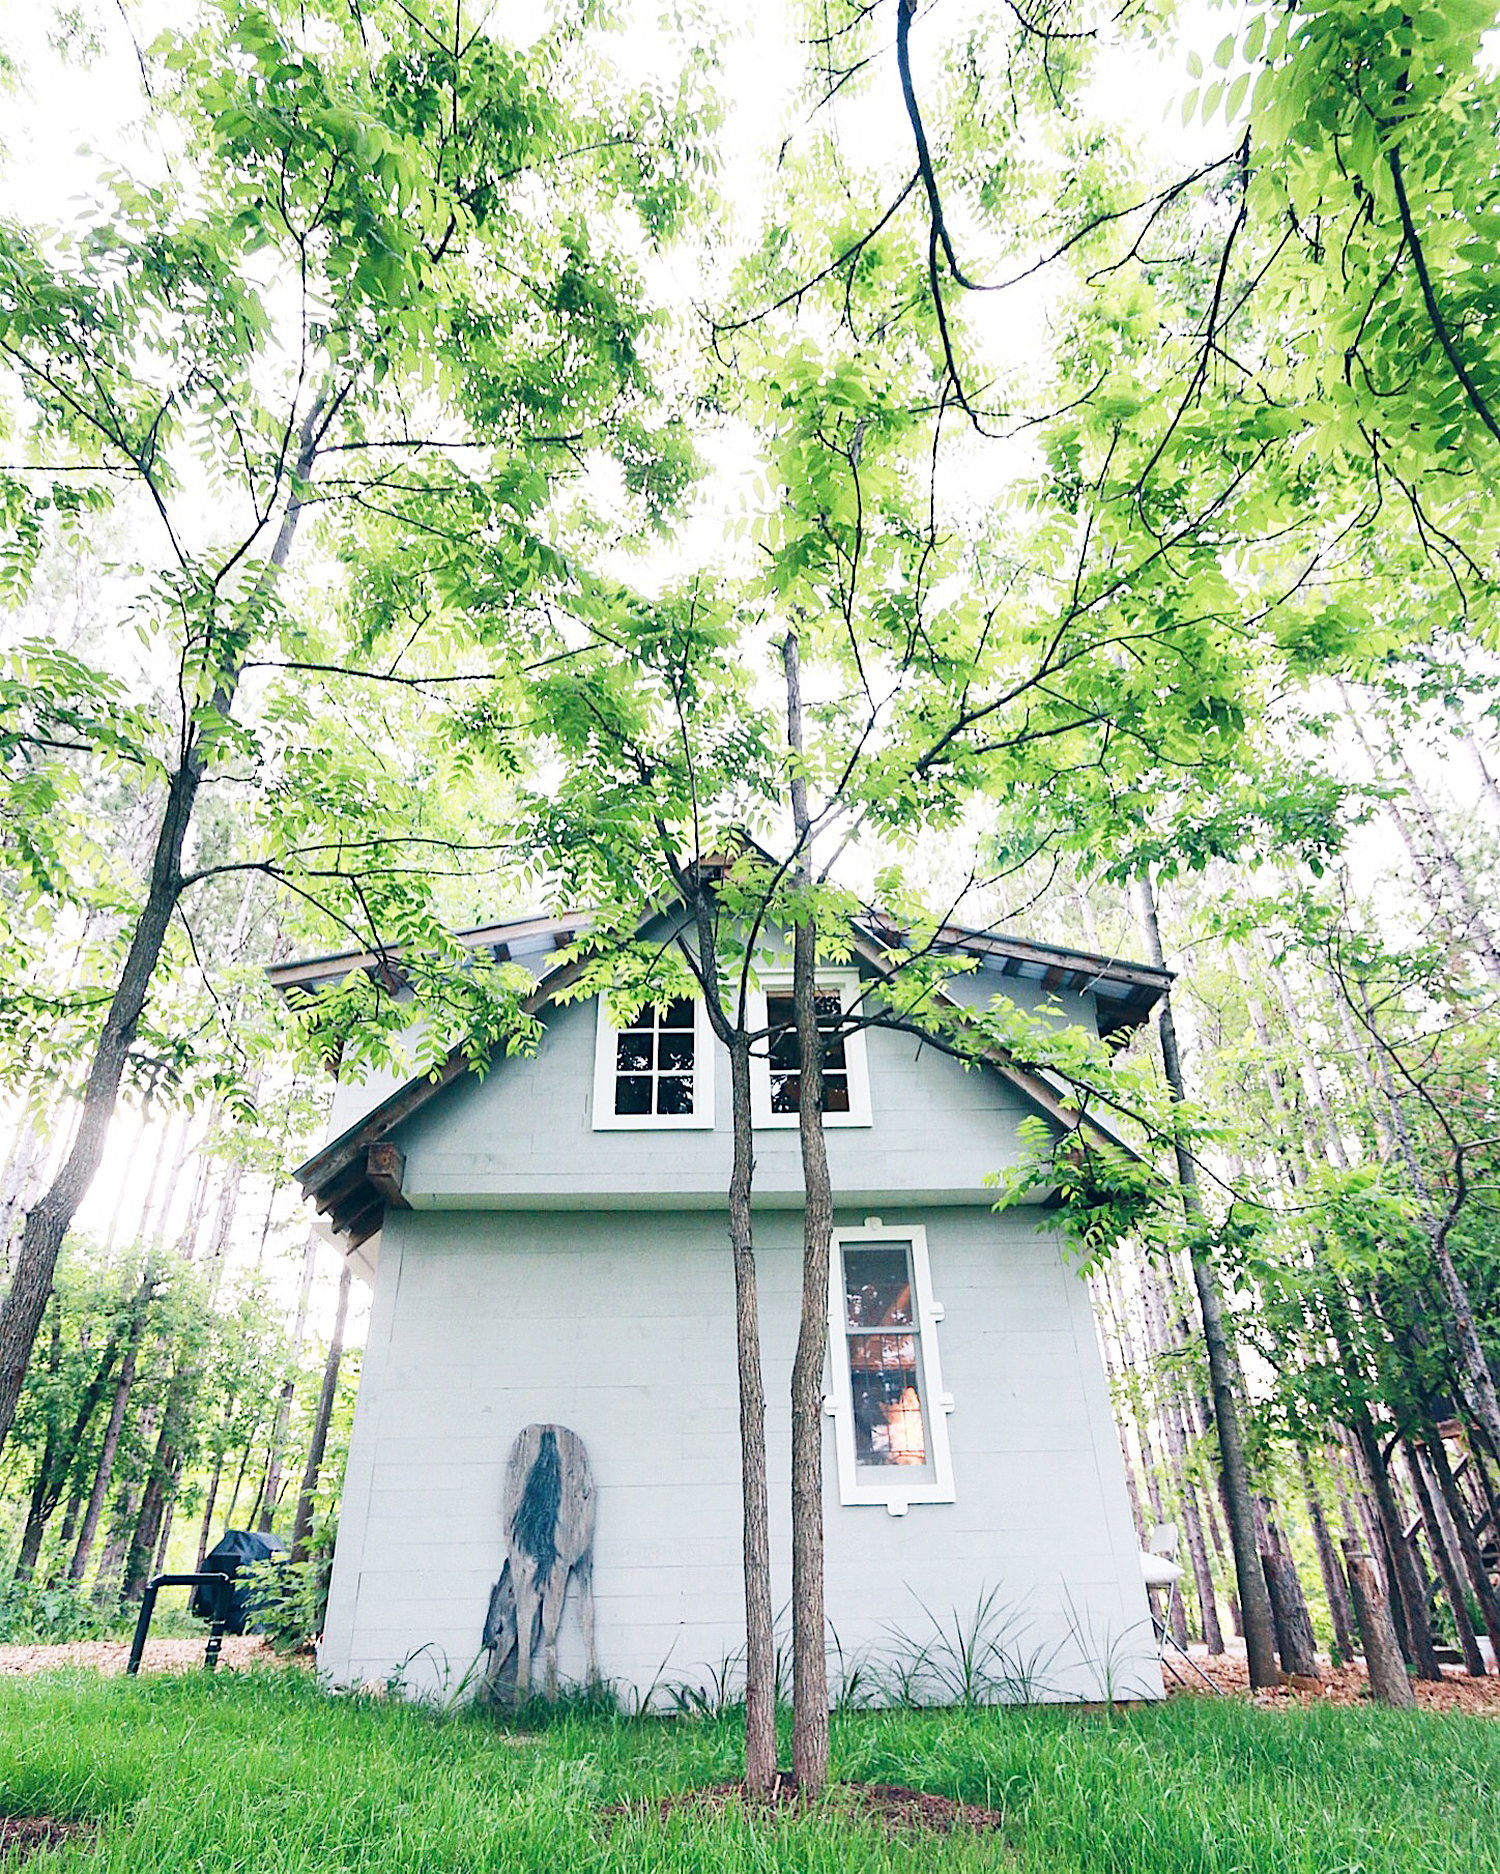 Fabulous design ideas for building a cabin and treehouse! See more on DESIGN THE LIFE YOU WANT TO LIVE by Lynne Knowlton